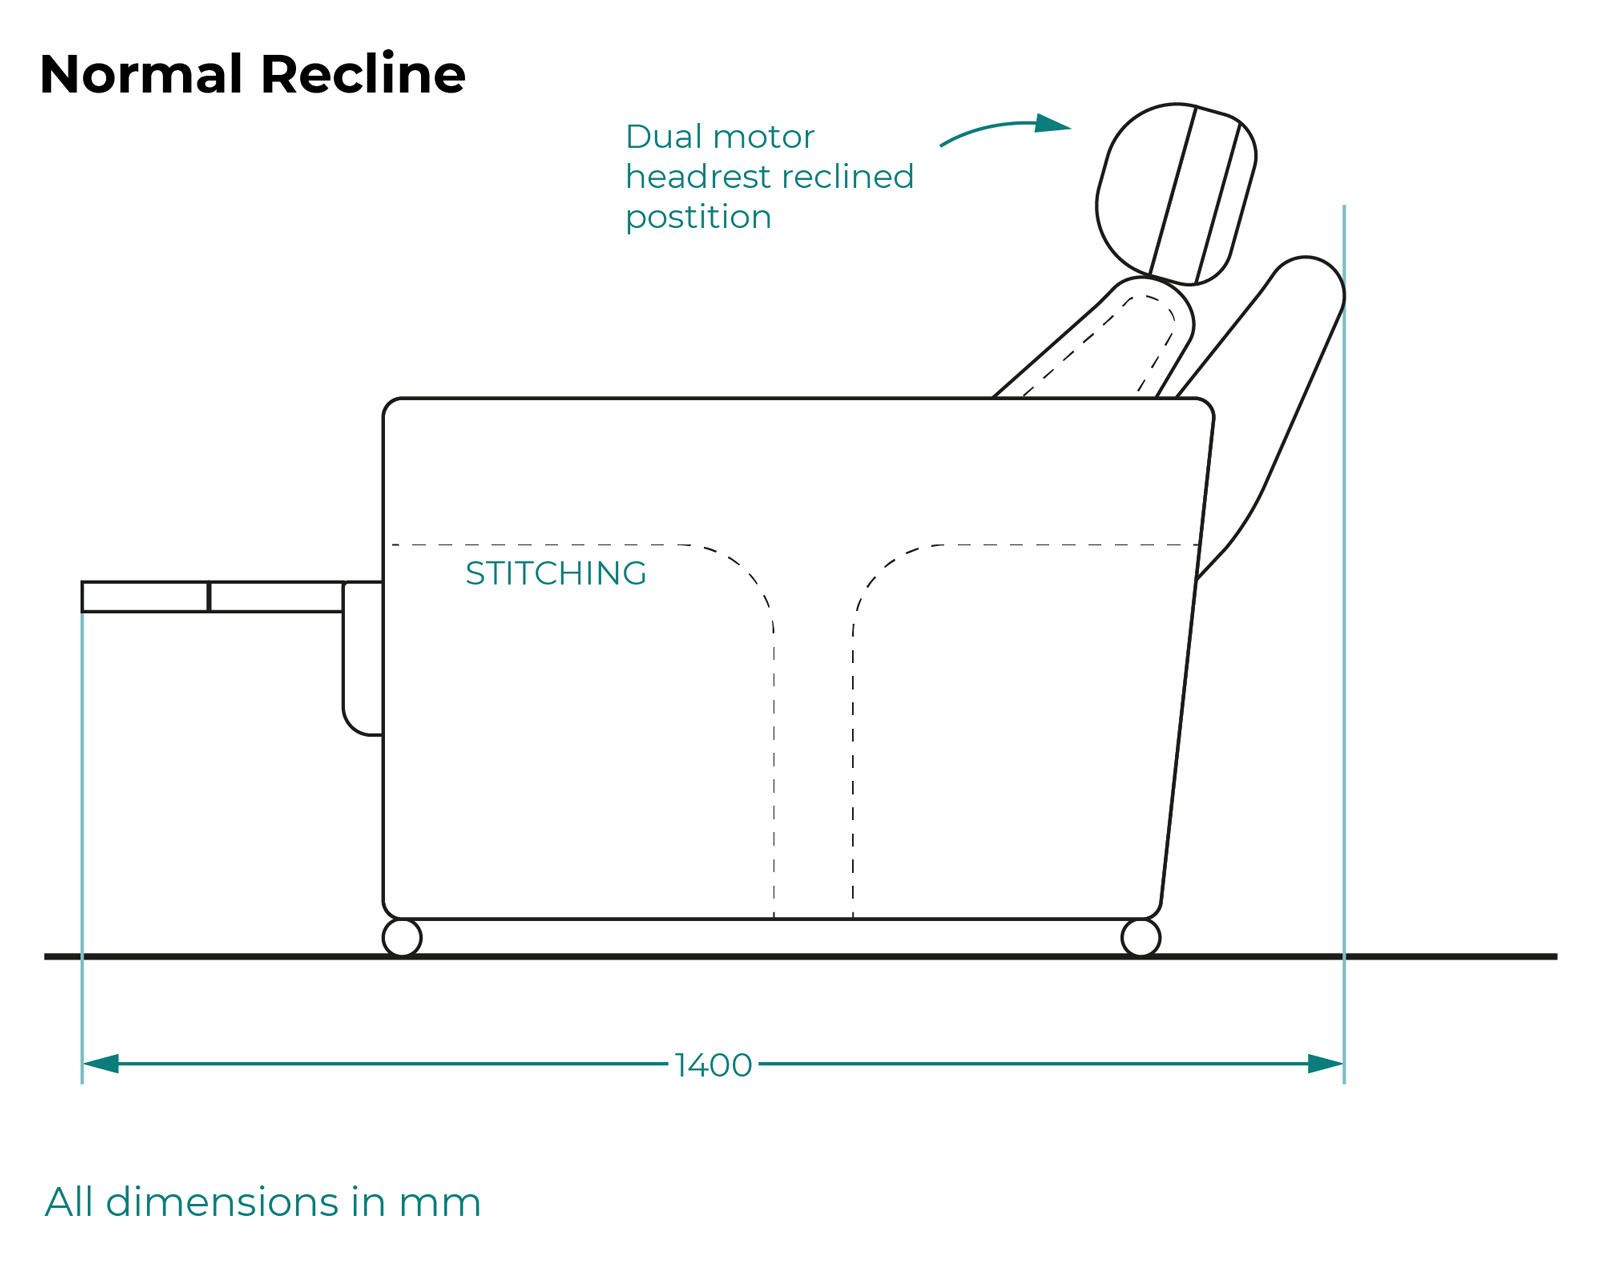 Serenity sideview - normal recline